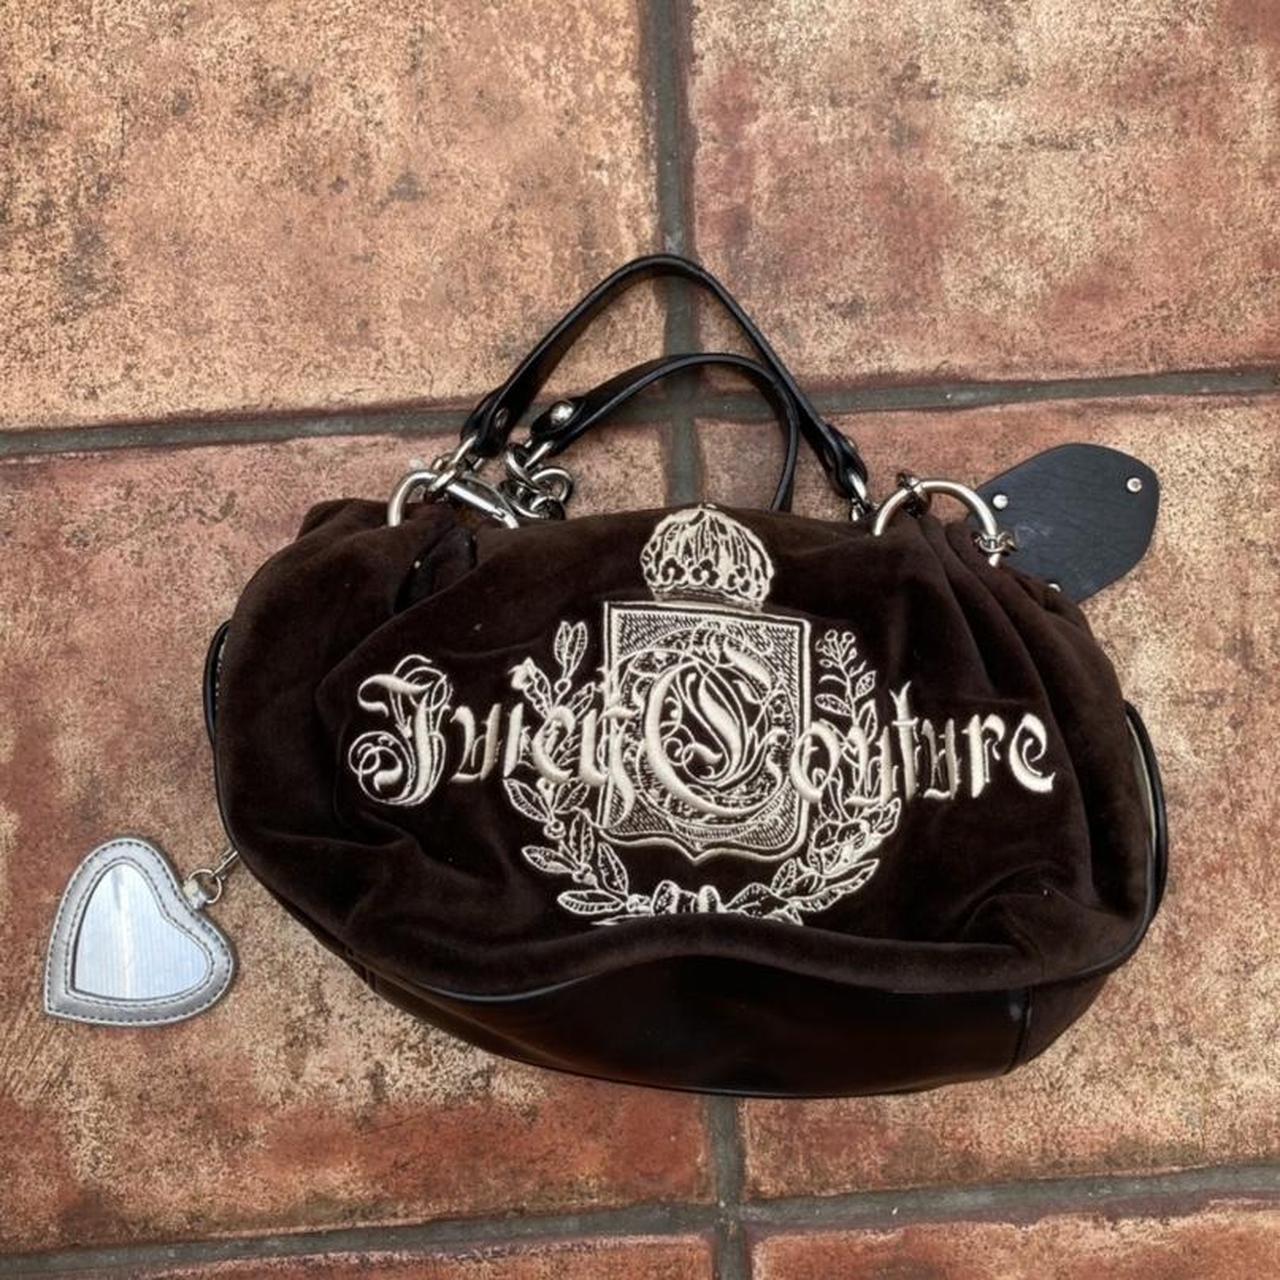 Juicy Couture | Bags | Juicy Couture Velour Bag | Poshmark